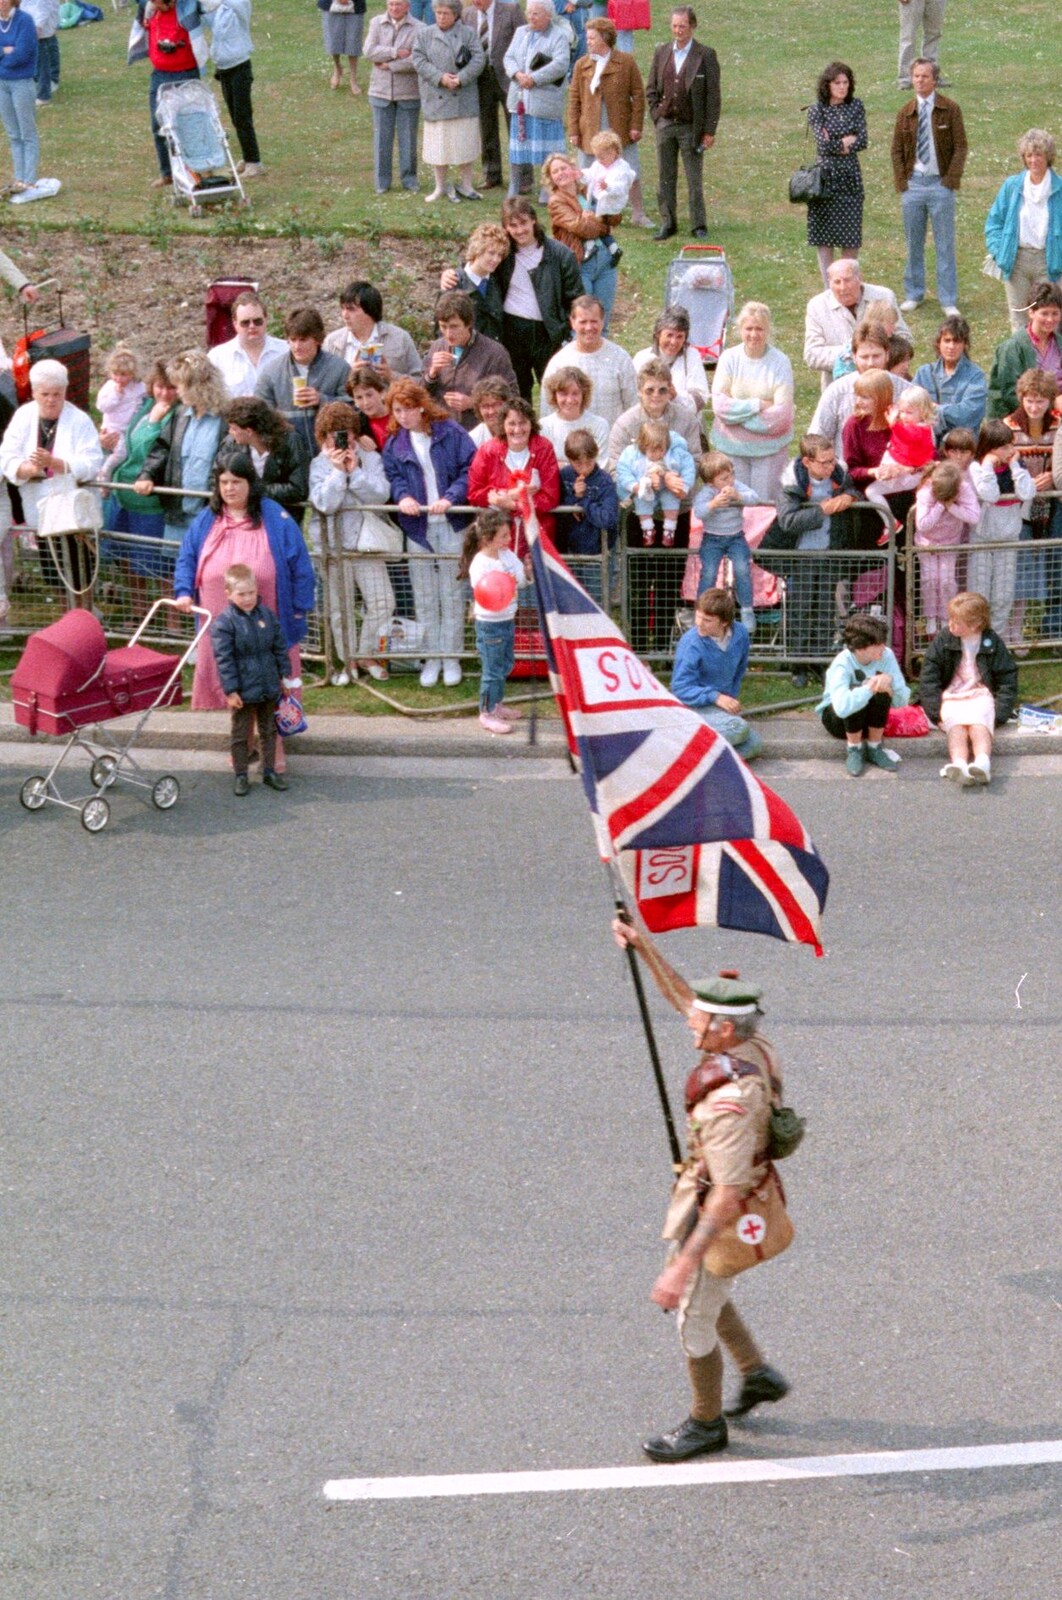 A flag bearer brings up the rear of the parade from Chantal and Andy's Wedding, and the Lord Mayor's Parade, Plymouth - 20th May 1987